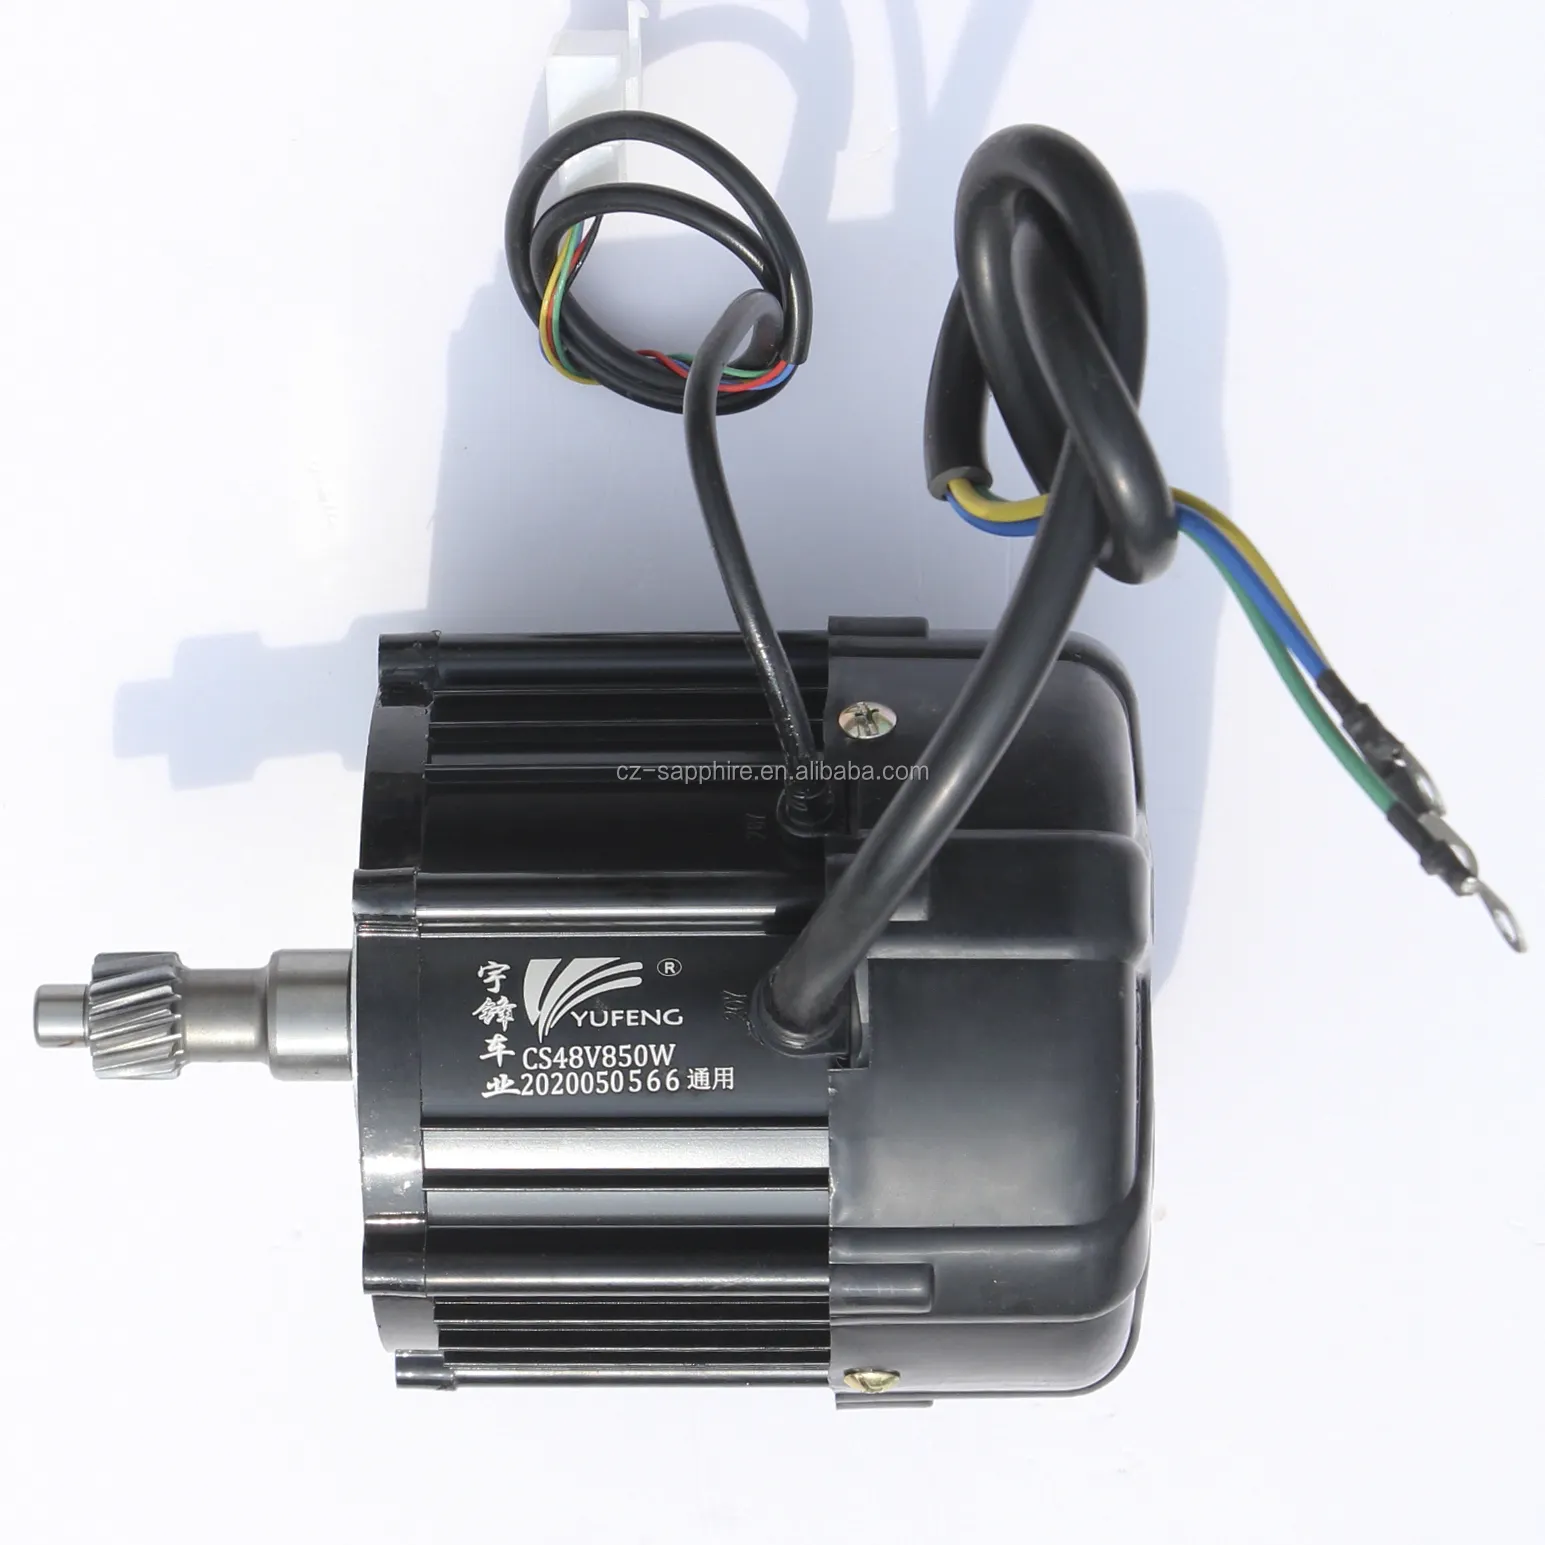 YuFeng Genuine and High performance MOTOR at reasonable prices Brushless Dc Sine Wave BLDC Motor 48V 1000W for E- rickshaw